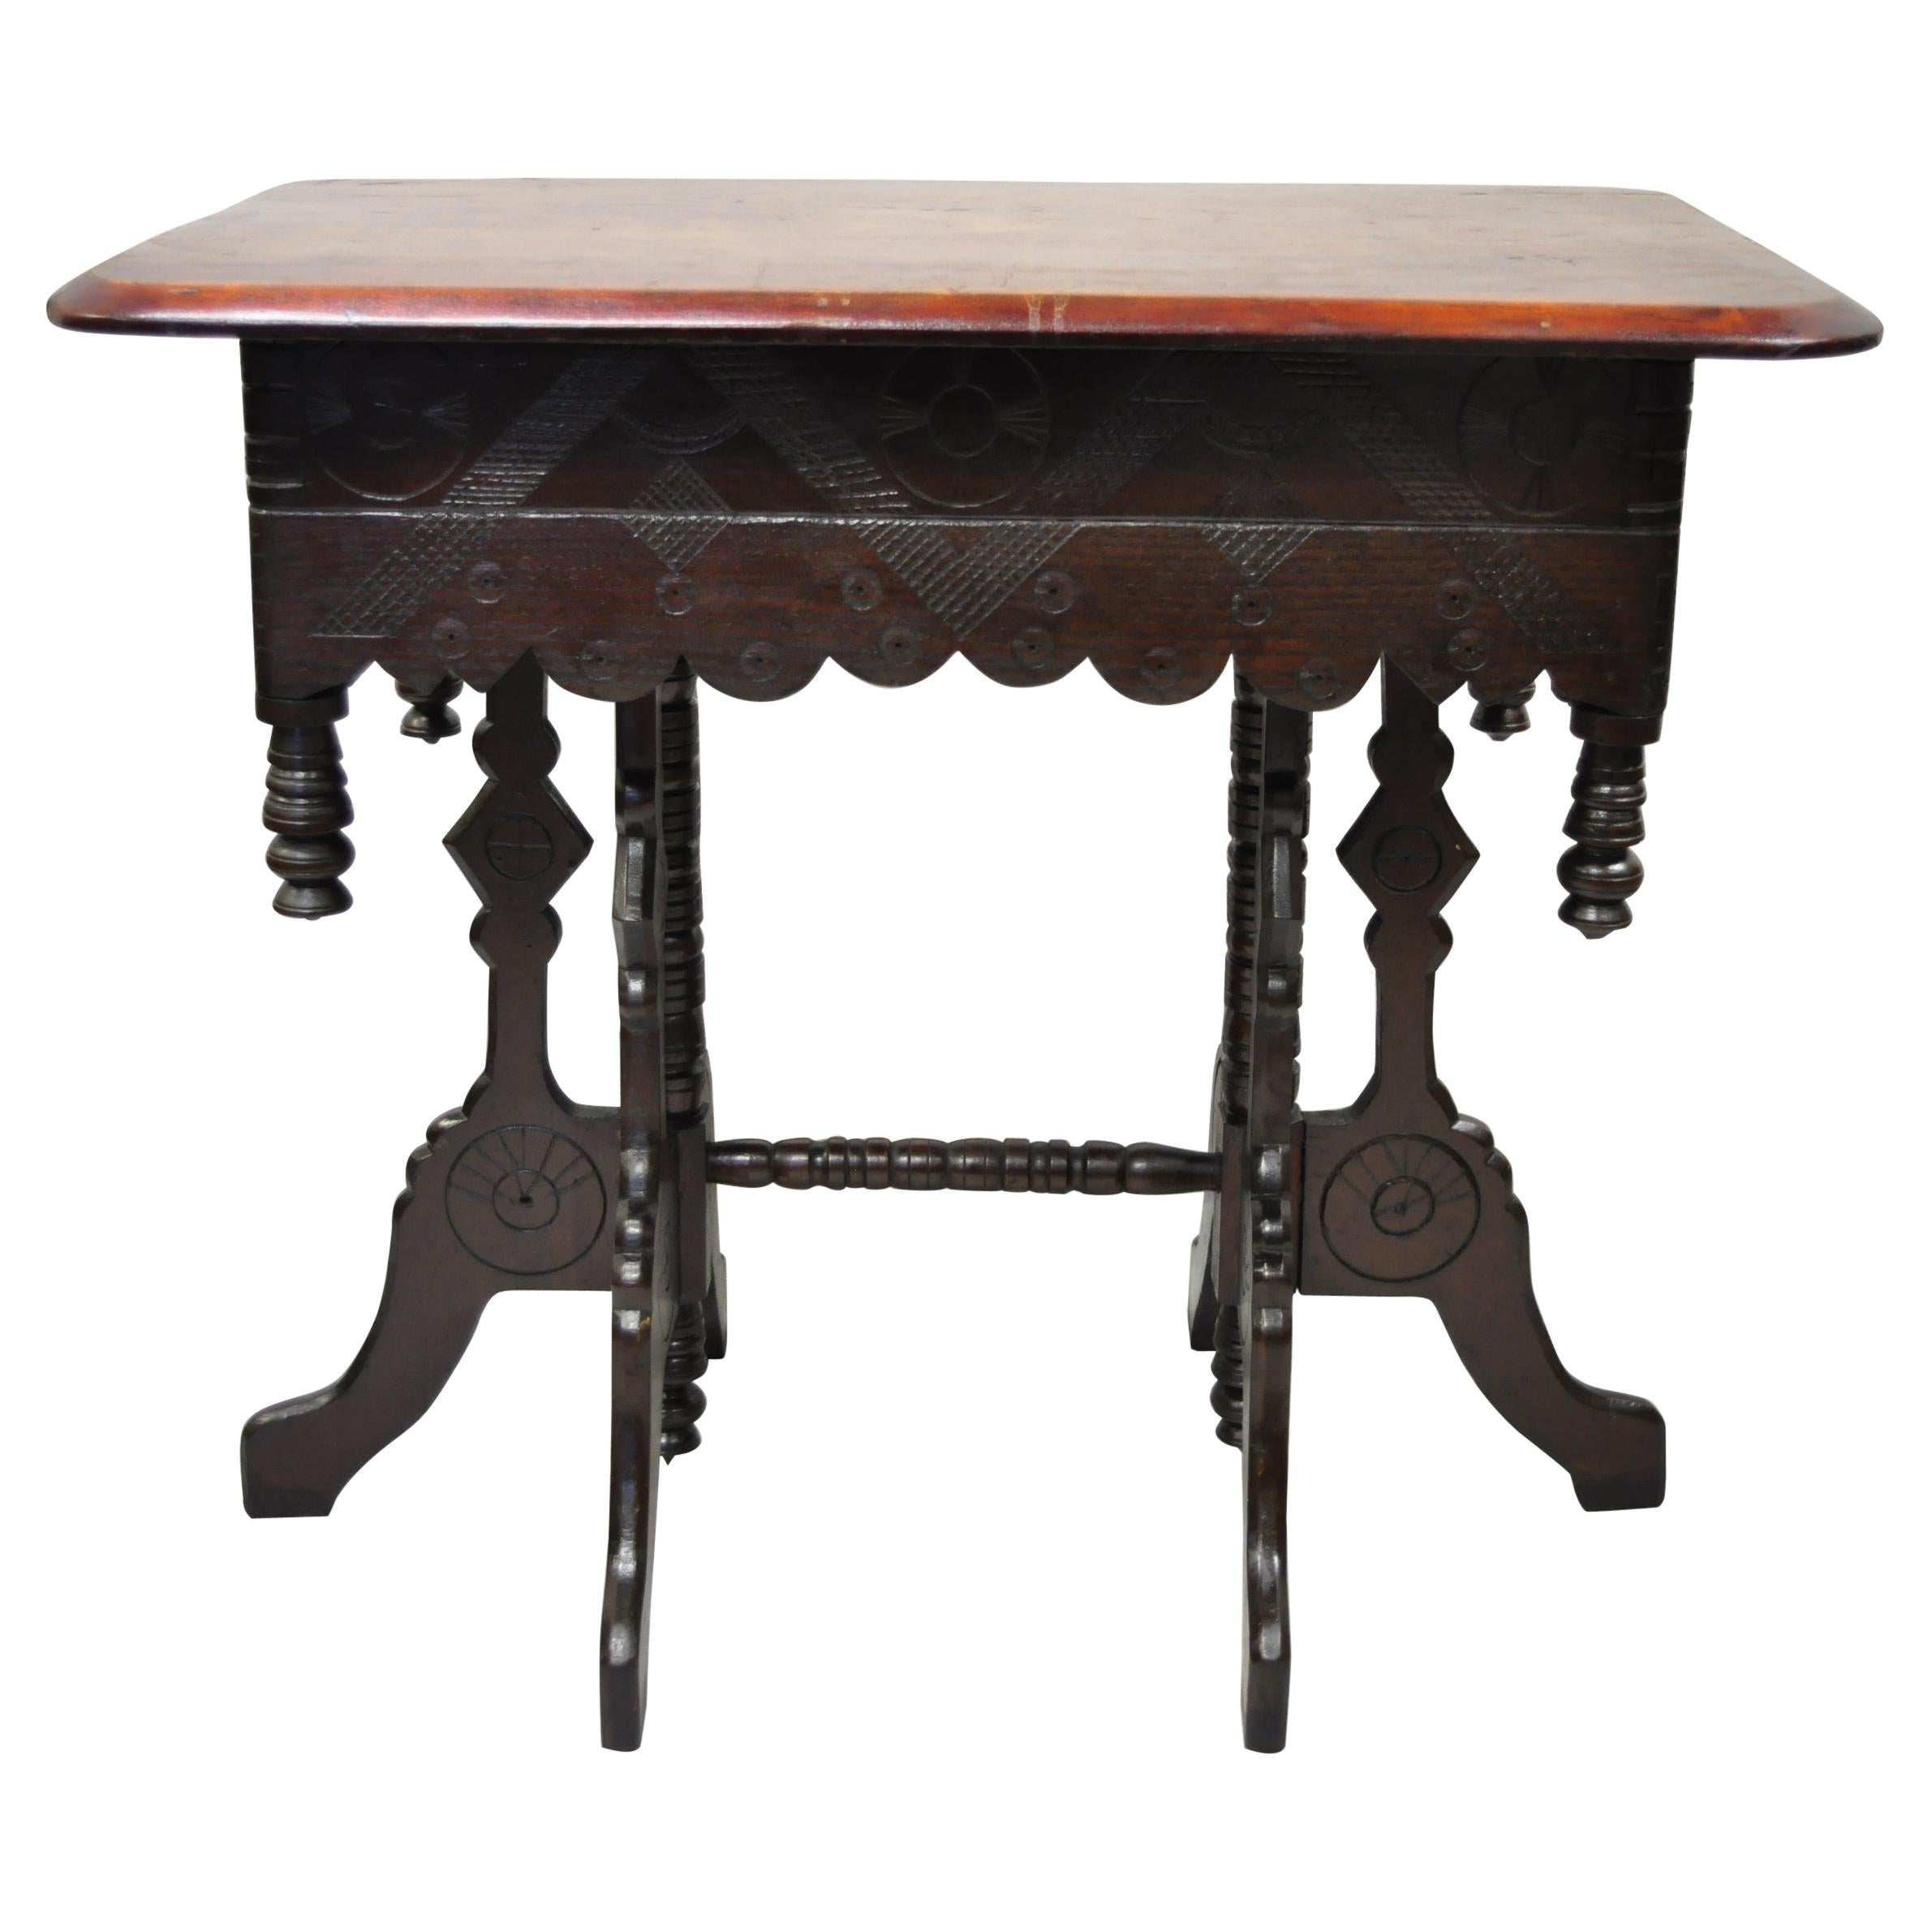 Antique Eastlake Victorian Aesthetic Movement Carved Walnut 6 Leg Parlor Table For Sale